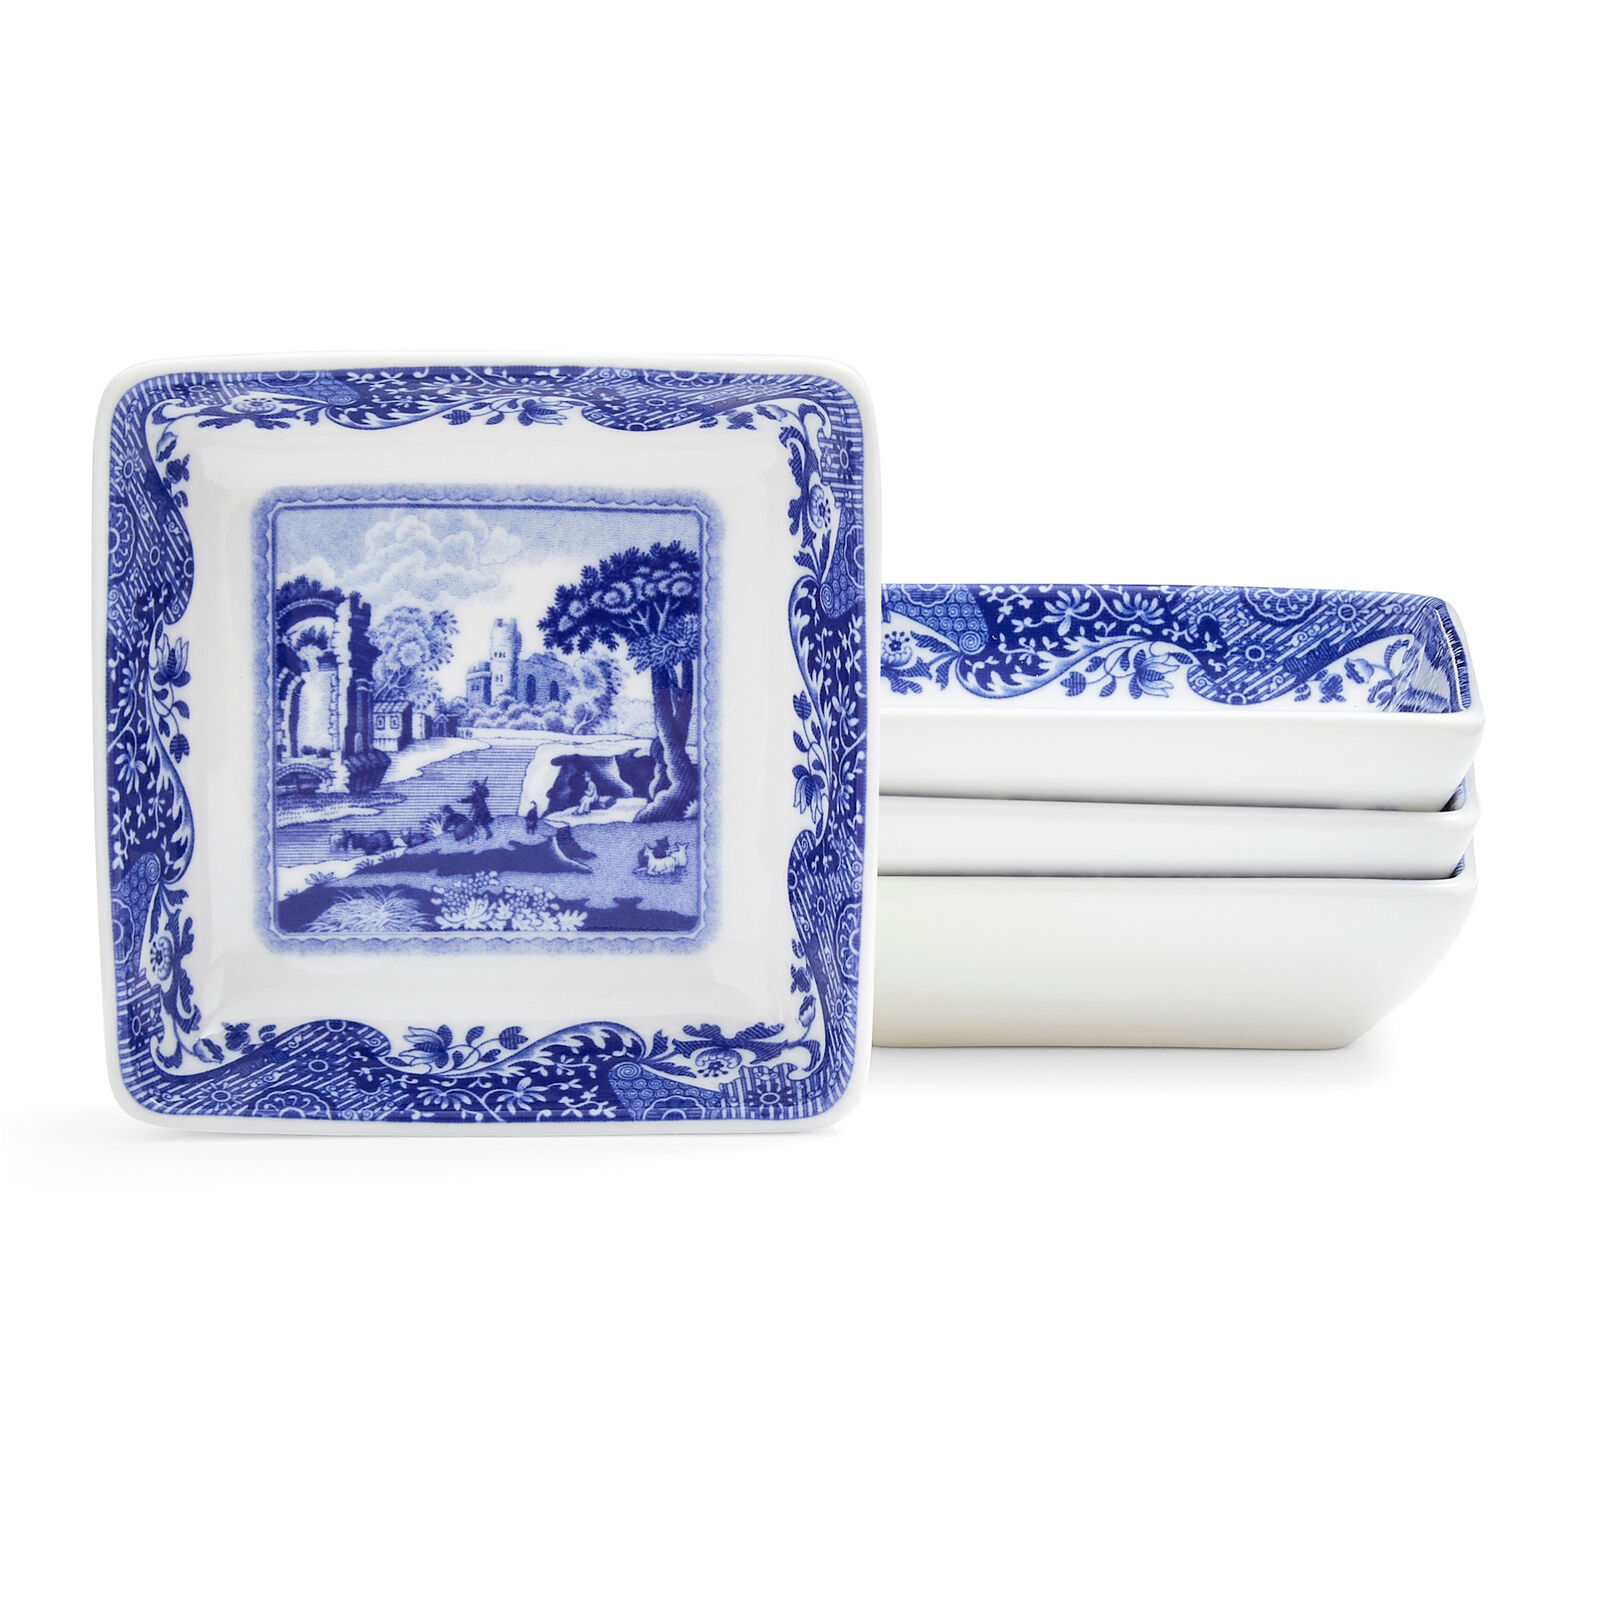 Spode Blue Italian Square Dishes Set of 4, 3 Inch, made of Fine Porcelain